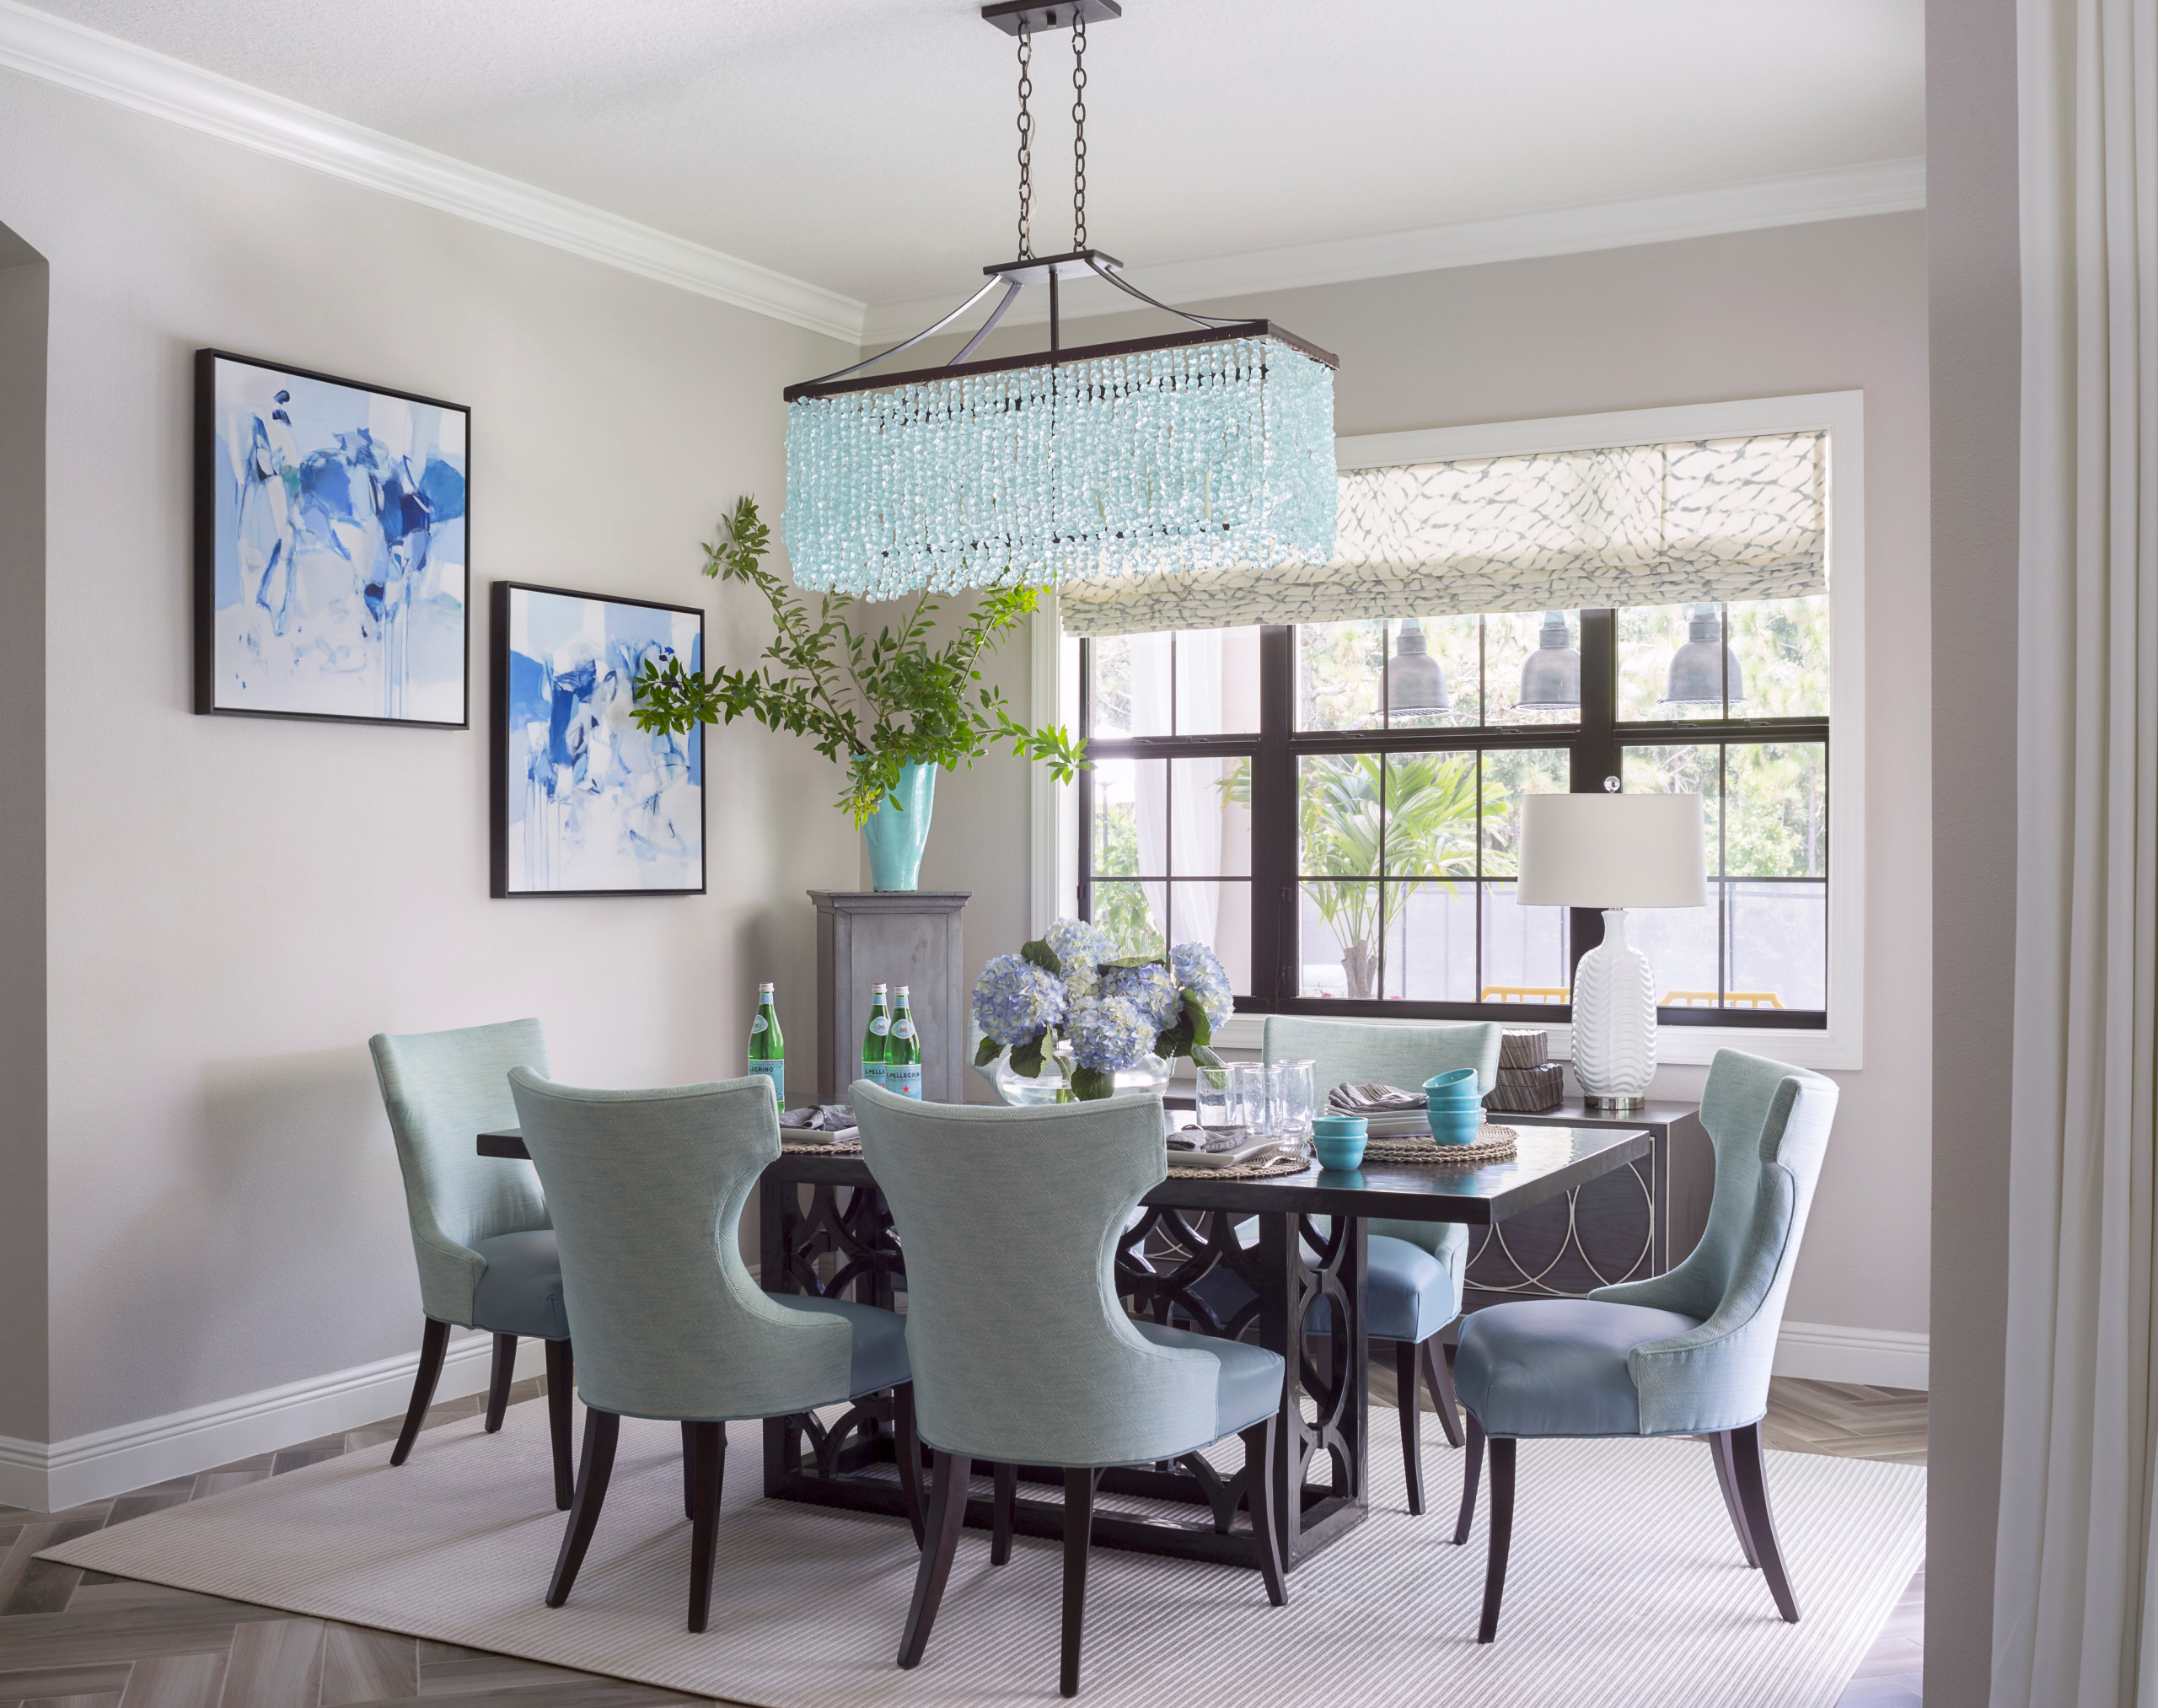 75 Beautiful Traditional Dining Room Pictures Ideas December 2020 Houzz